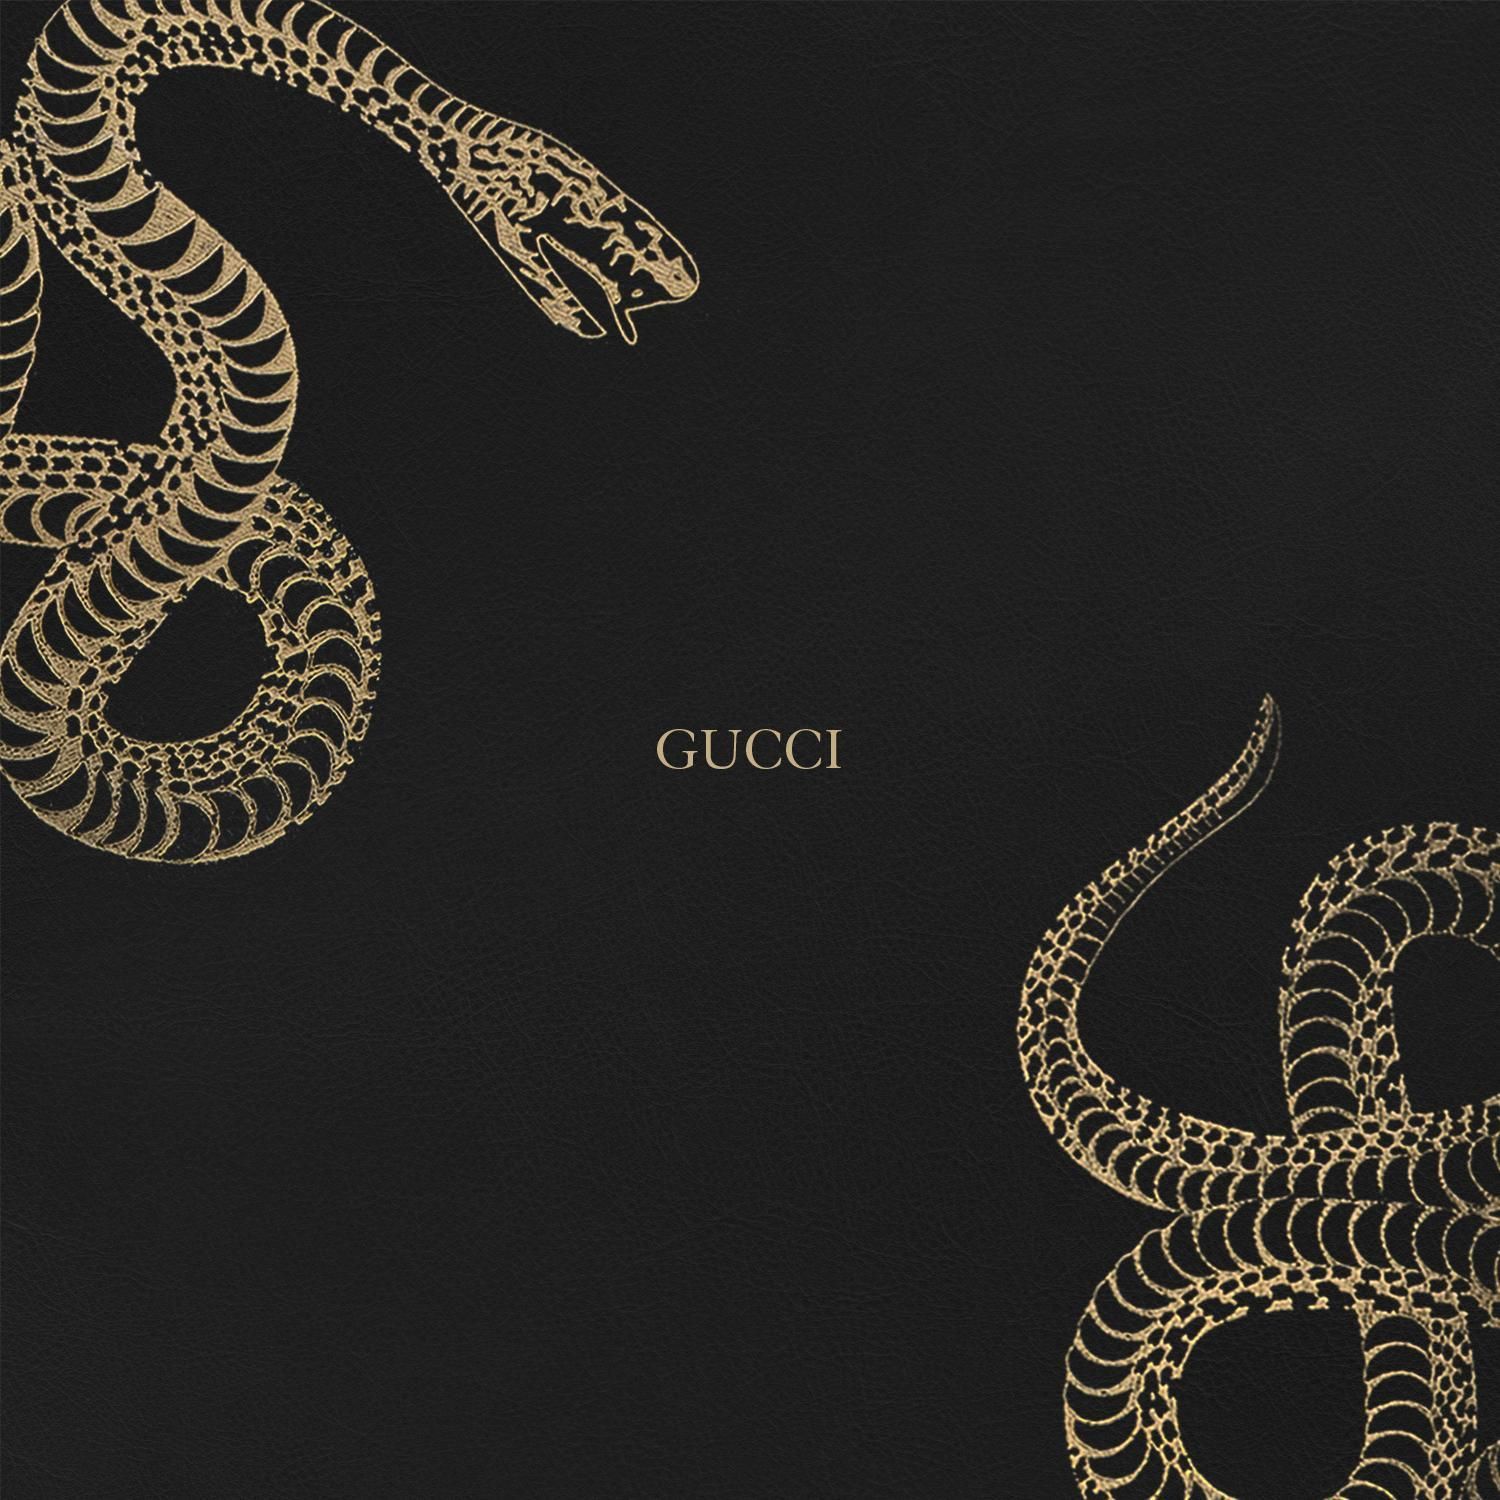 Gucci iPhone Wallpaper Free Gucci iPhone Background 2020. Apple watch wallpaper, Watch wallpaper, Apple watch custom faces